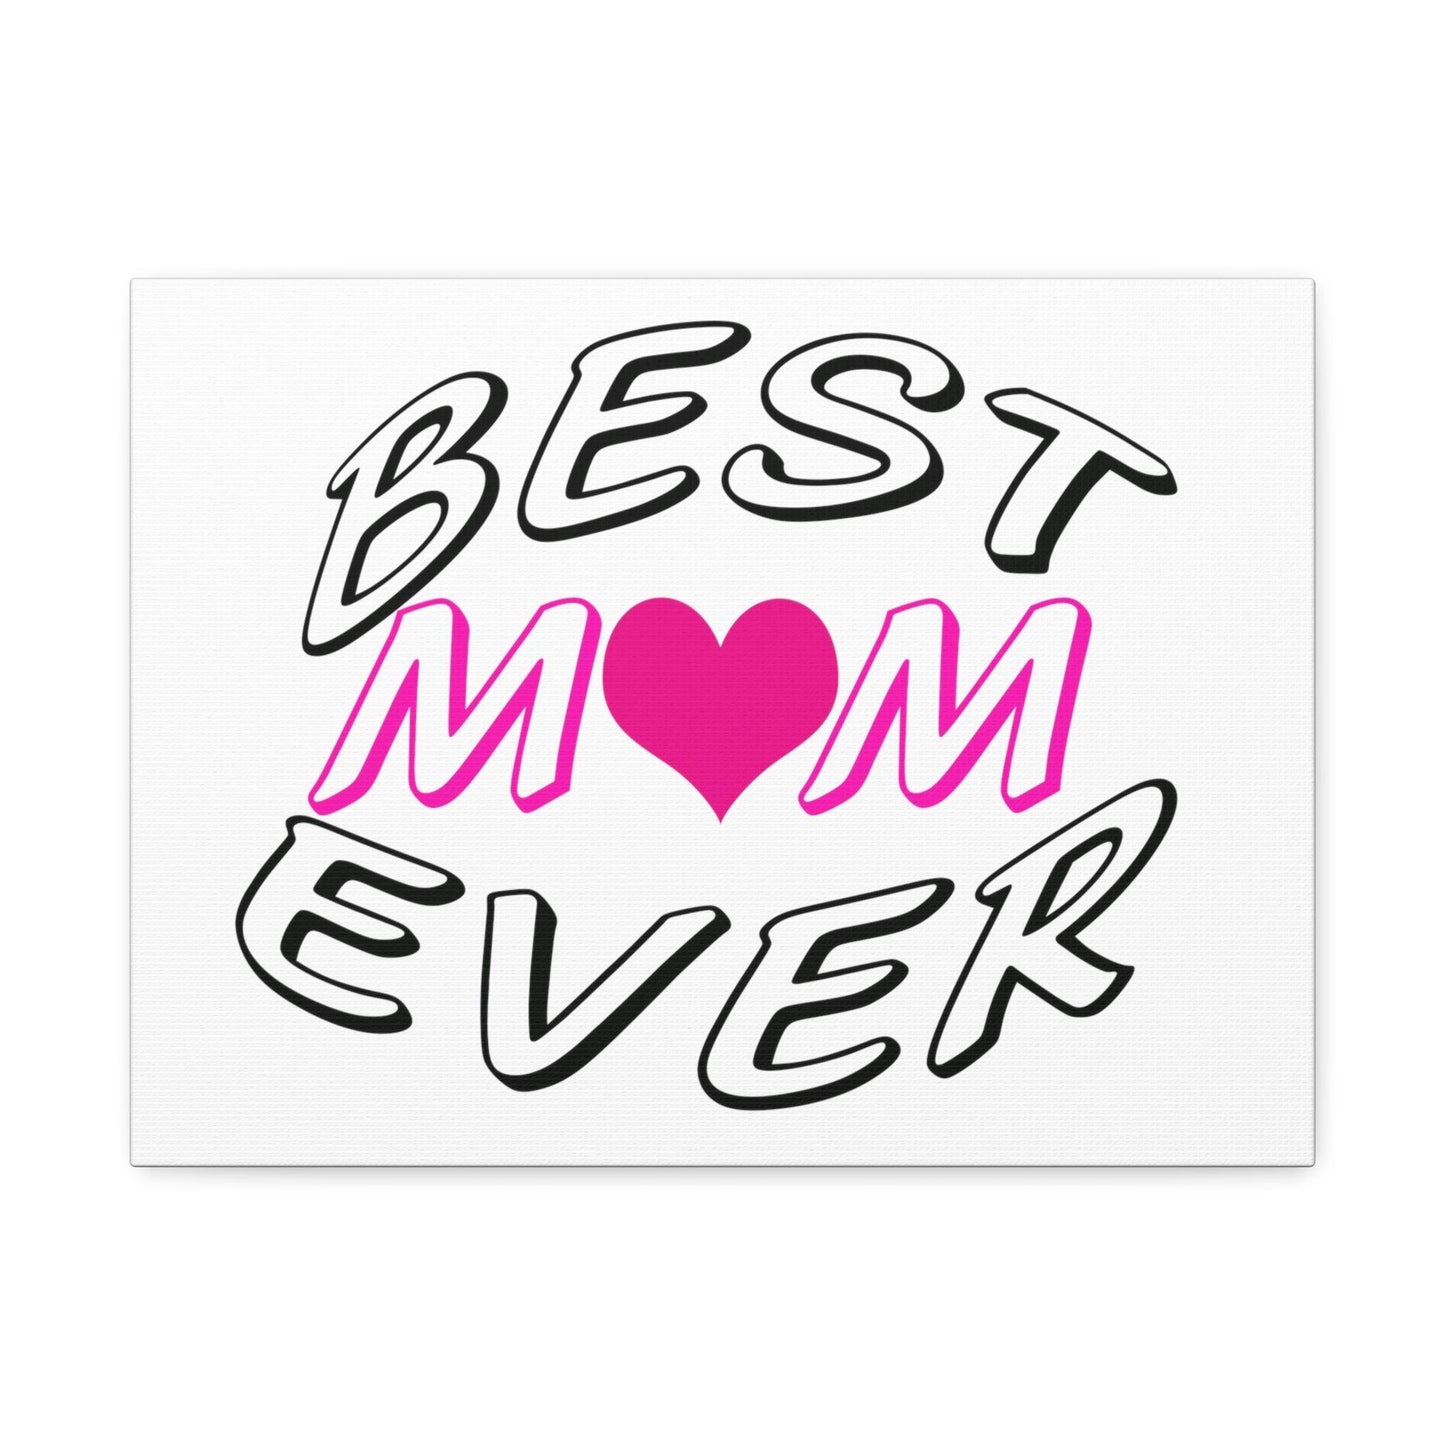 Best Mom Ever Satin Canvas, Stretched